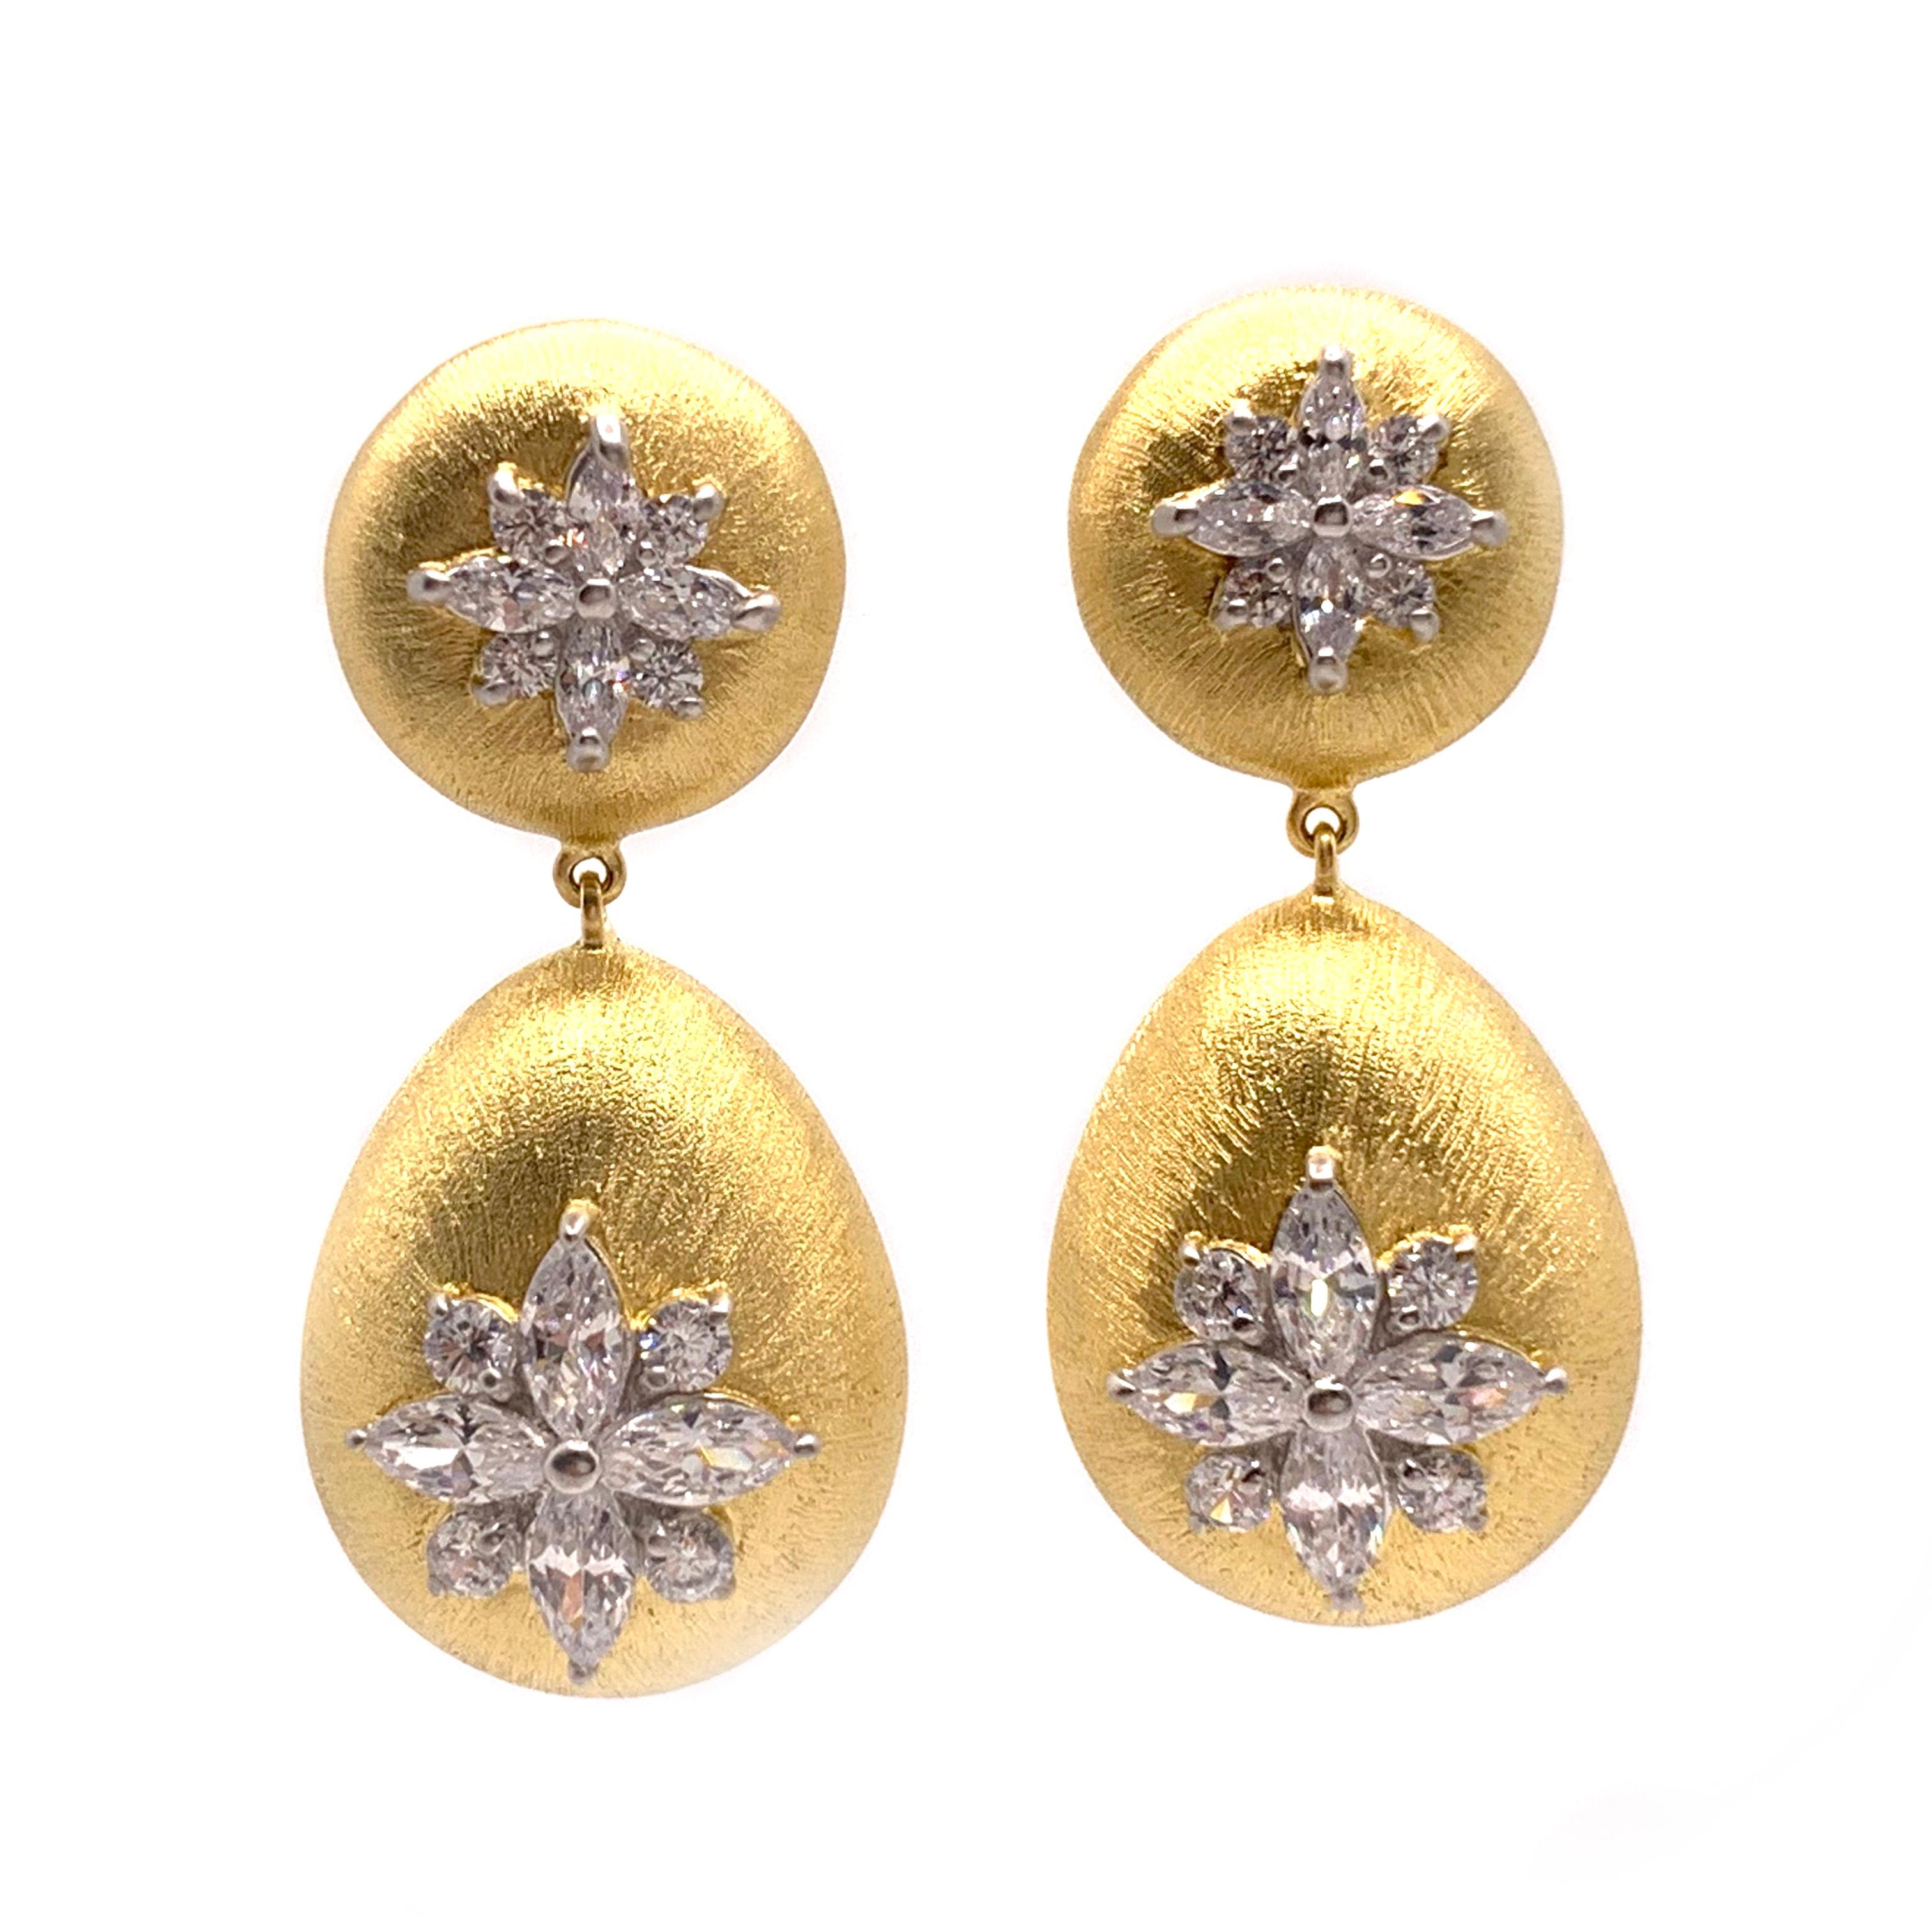 Stunning Bijoux Num's Hand-engraved Marquis Flower Vermeil Drop Earrings.

These beautiful earrings features marquis and round simulated diamonds handset in 18k yellow gold vermeil over sterling silver. The setting was engraved throughout by hand